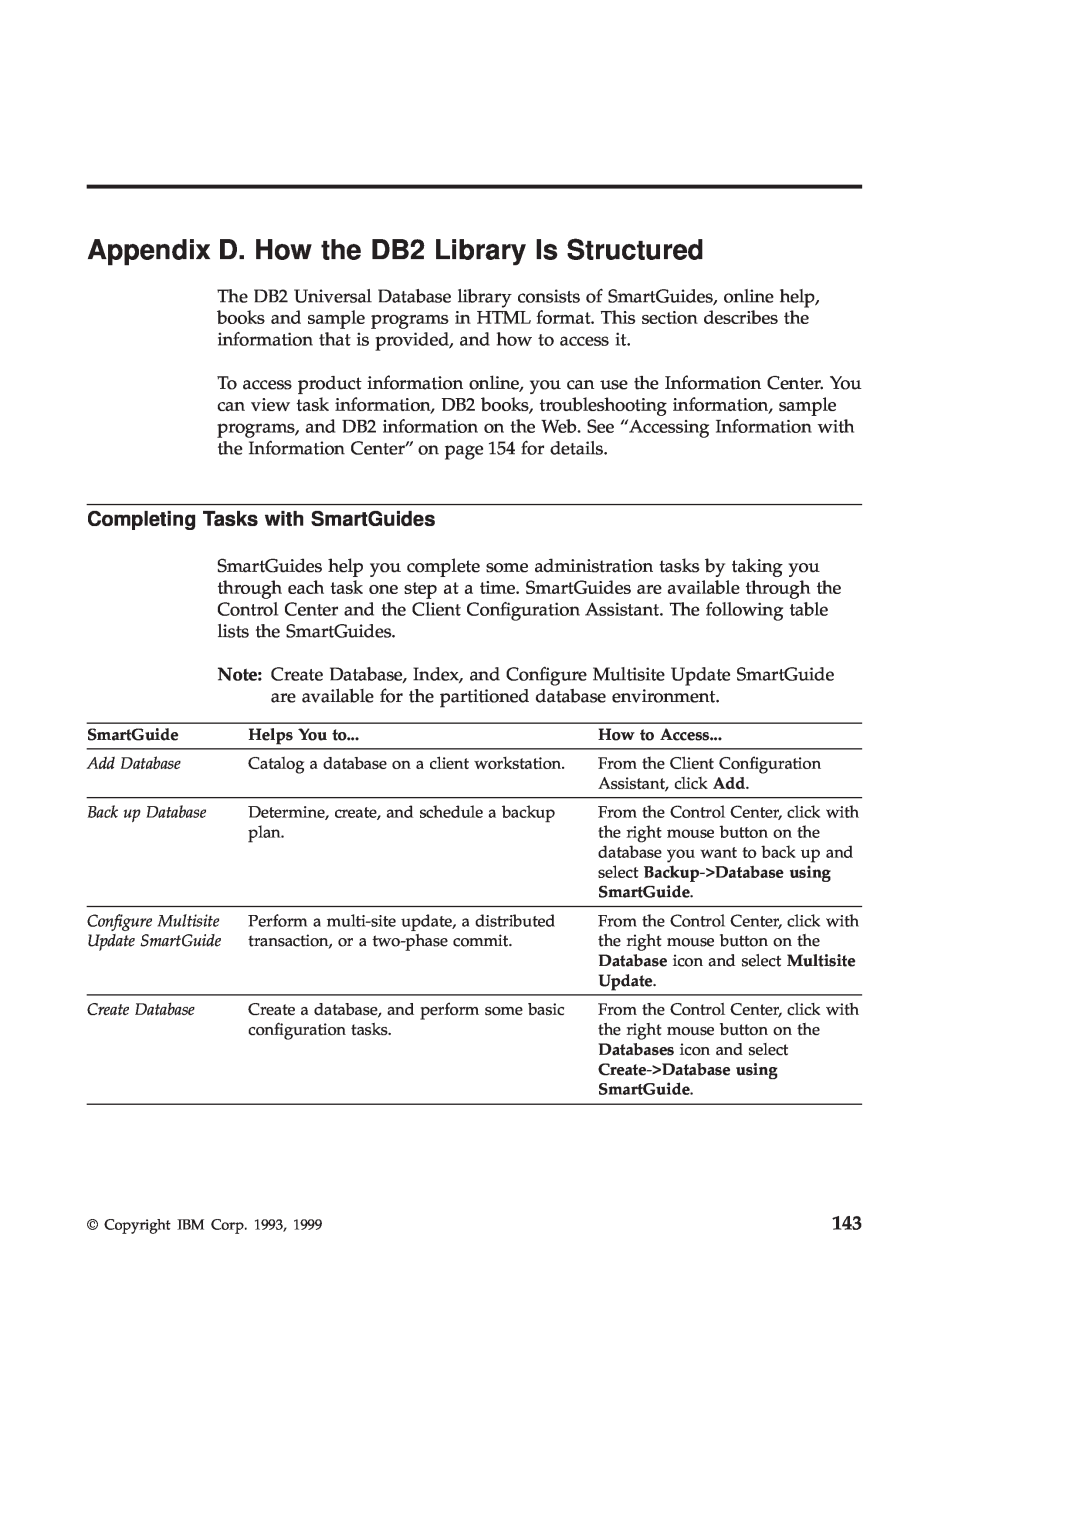 IBM GC09-2830-00 manual Appendix D. How the DB2 Library Is Structured, Completing Tasks with SmartGuides 